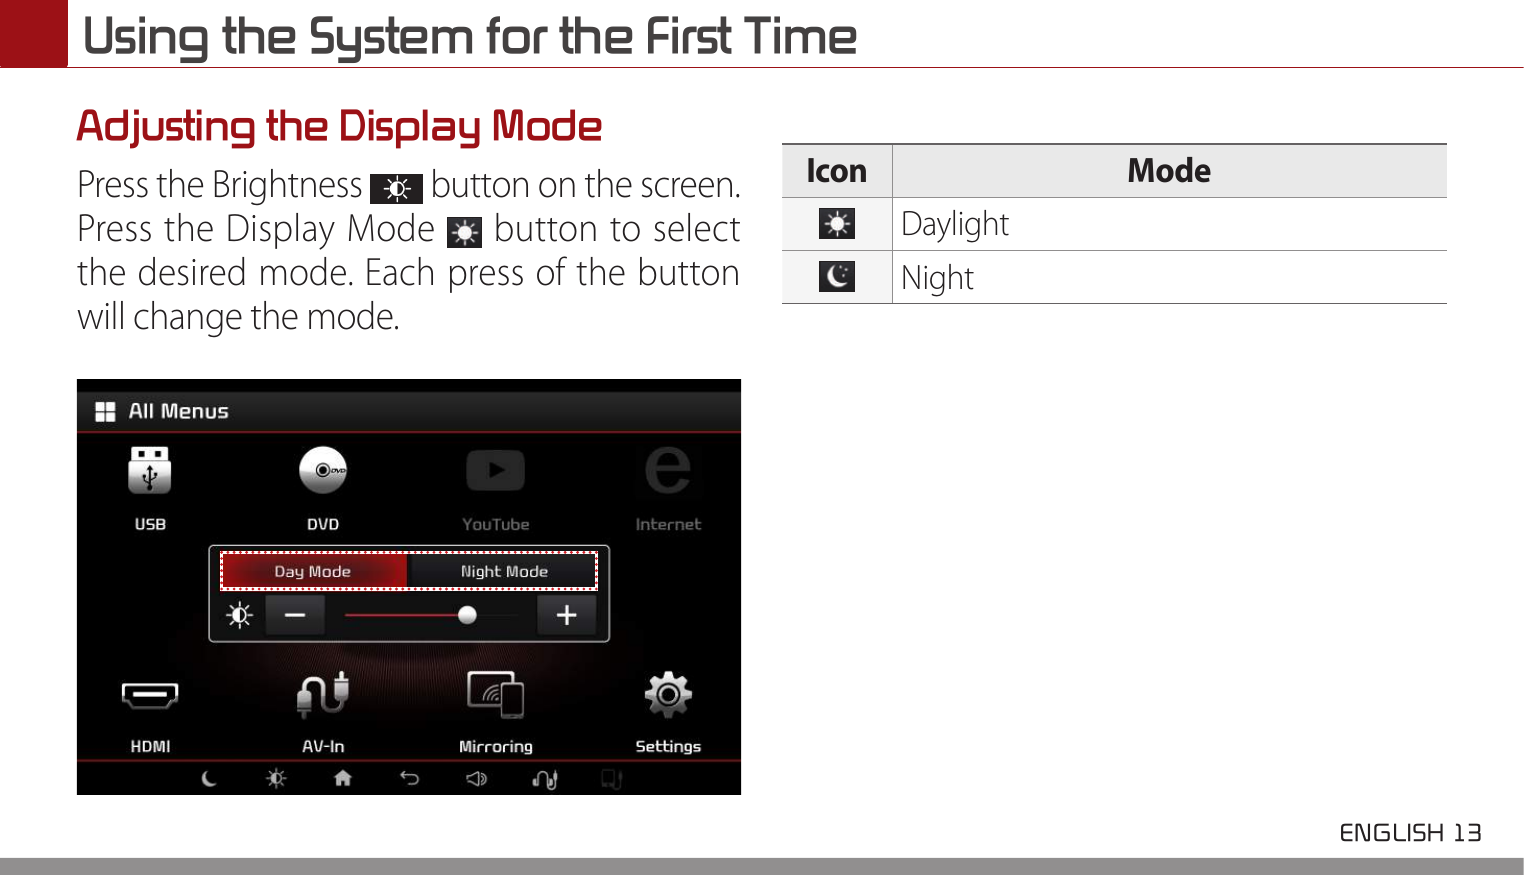  ENGLISH 13 Using the System for the First TimeAdjusting the Display ModePress the Brightness   button on the screen.Press the Display Mode   button to select the desired mode. Each press of the button will change the mode.Icon ModeDaylightNight